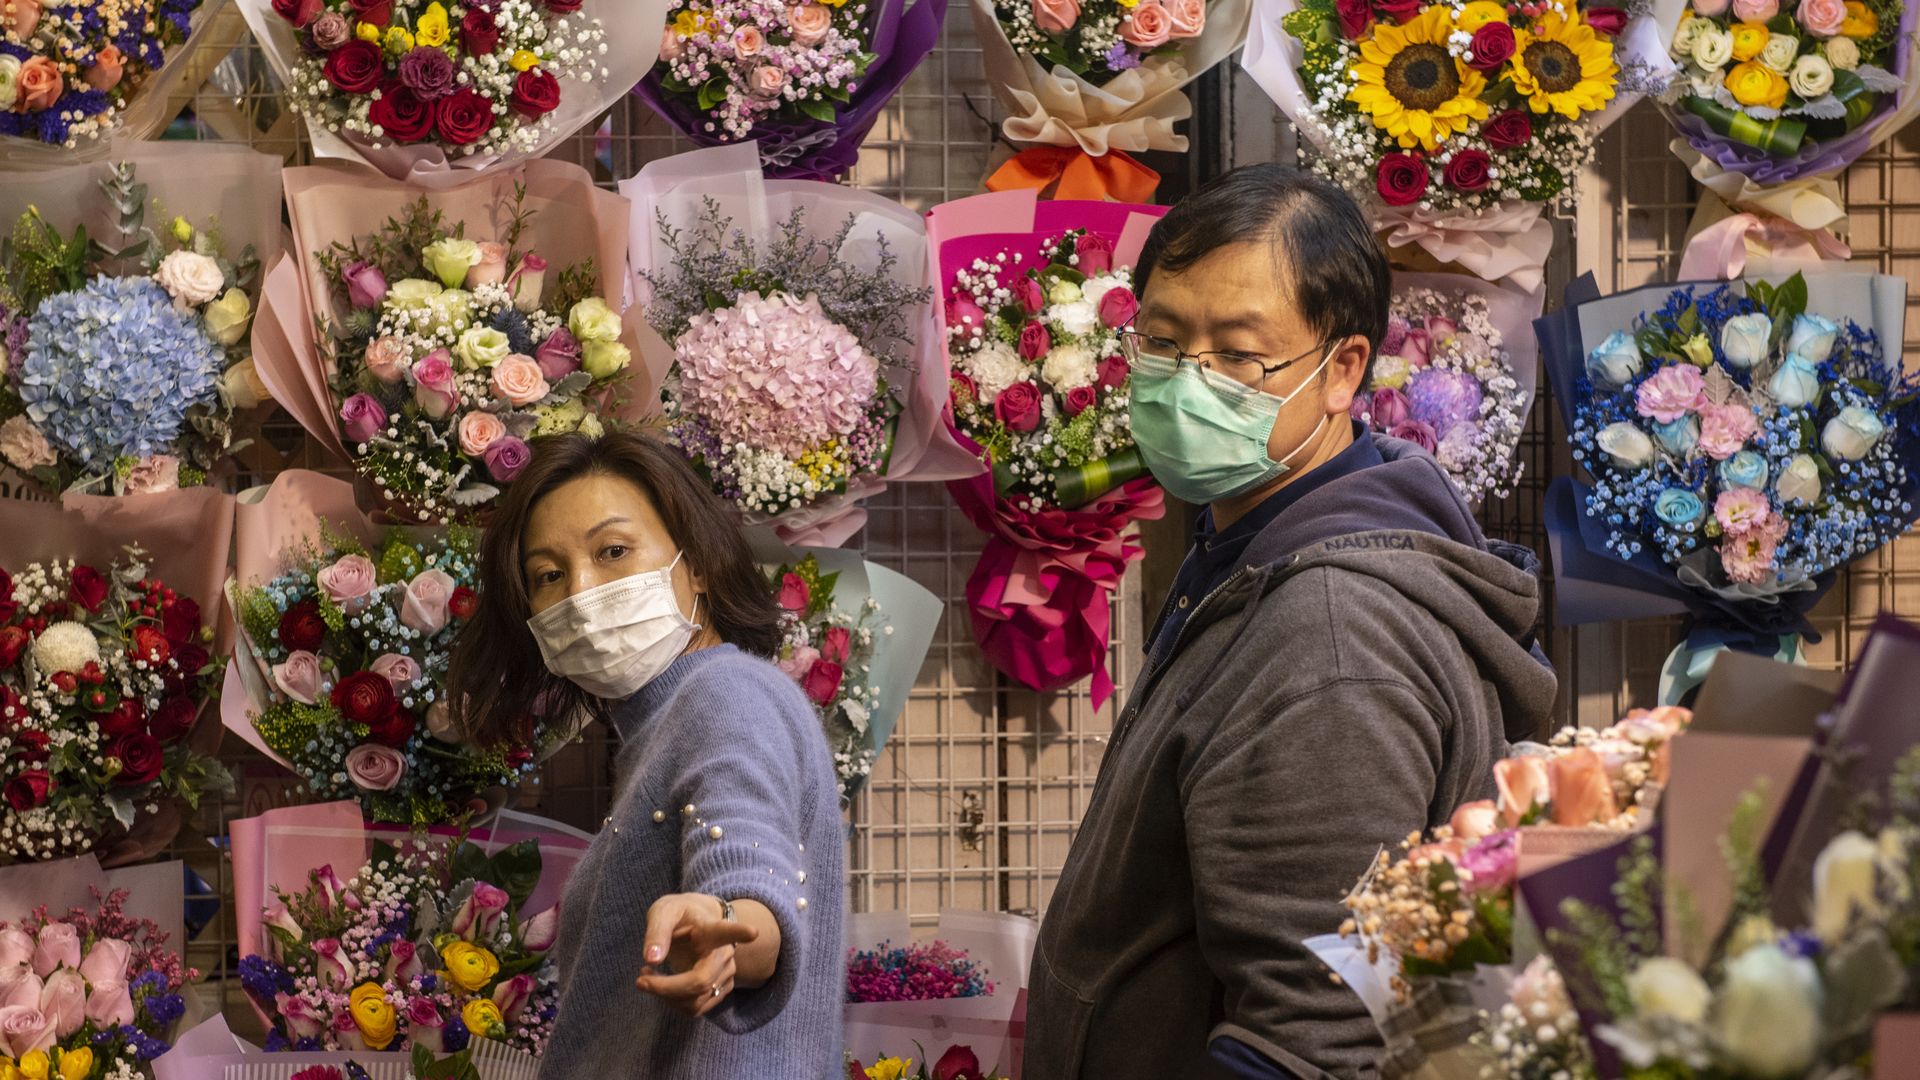 In this image, a woman and man wearing protective face masks browse flowers 